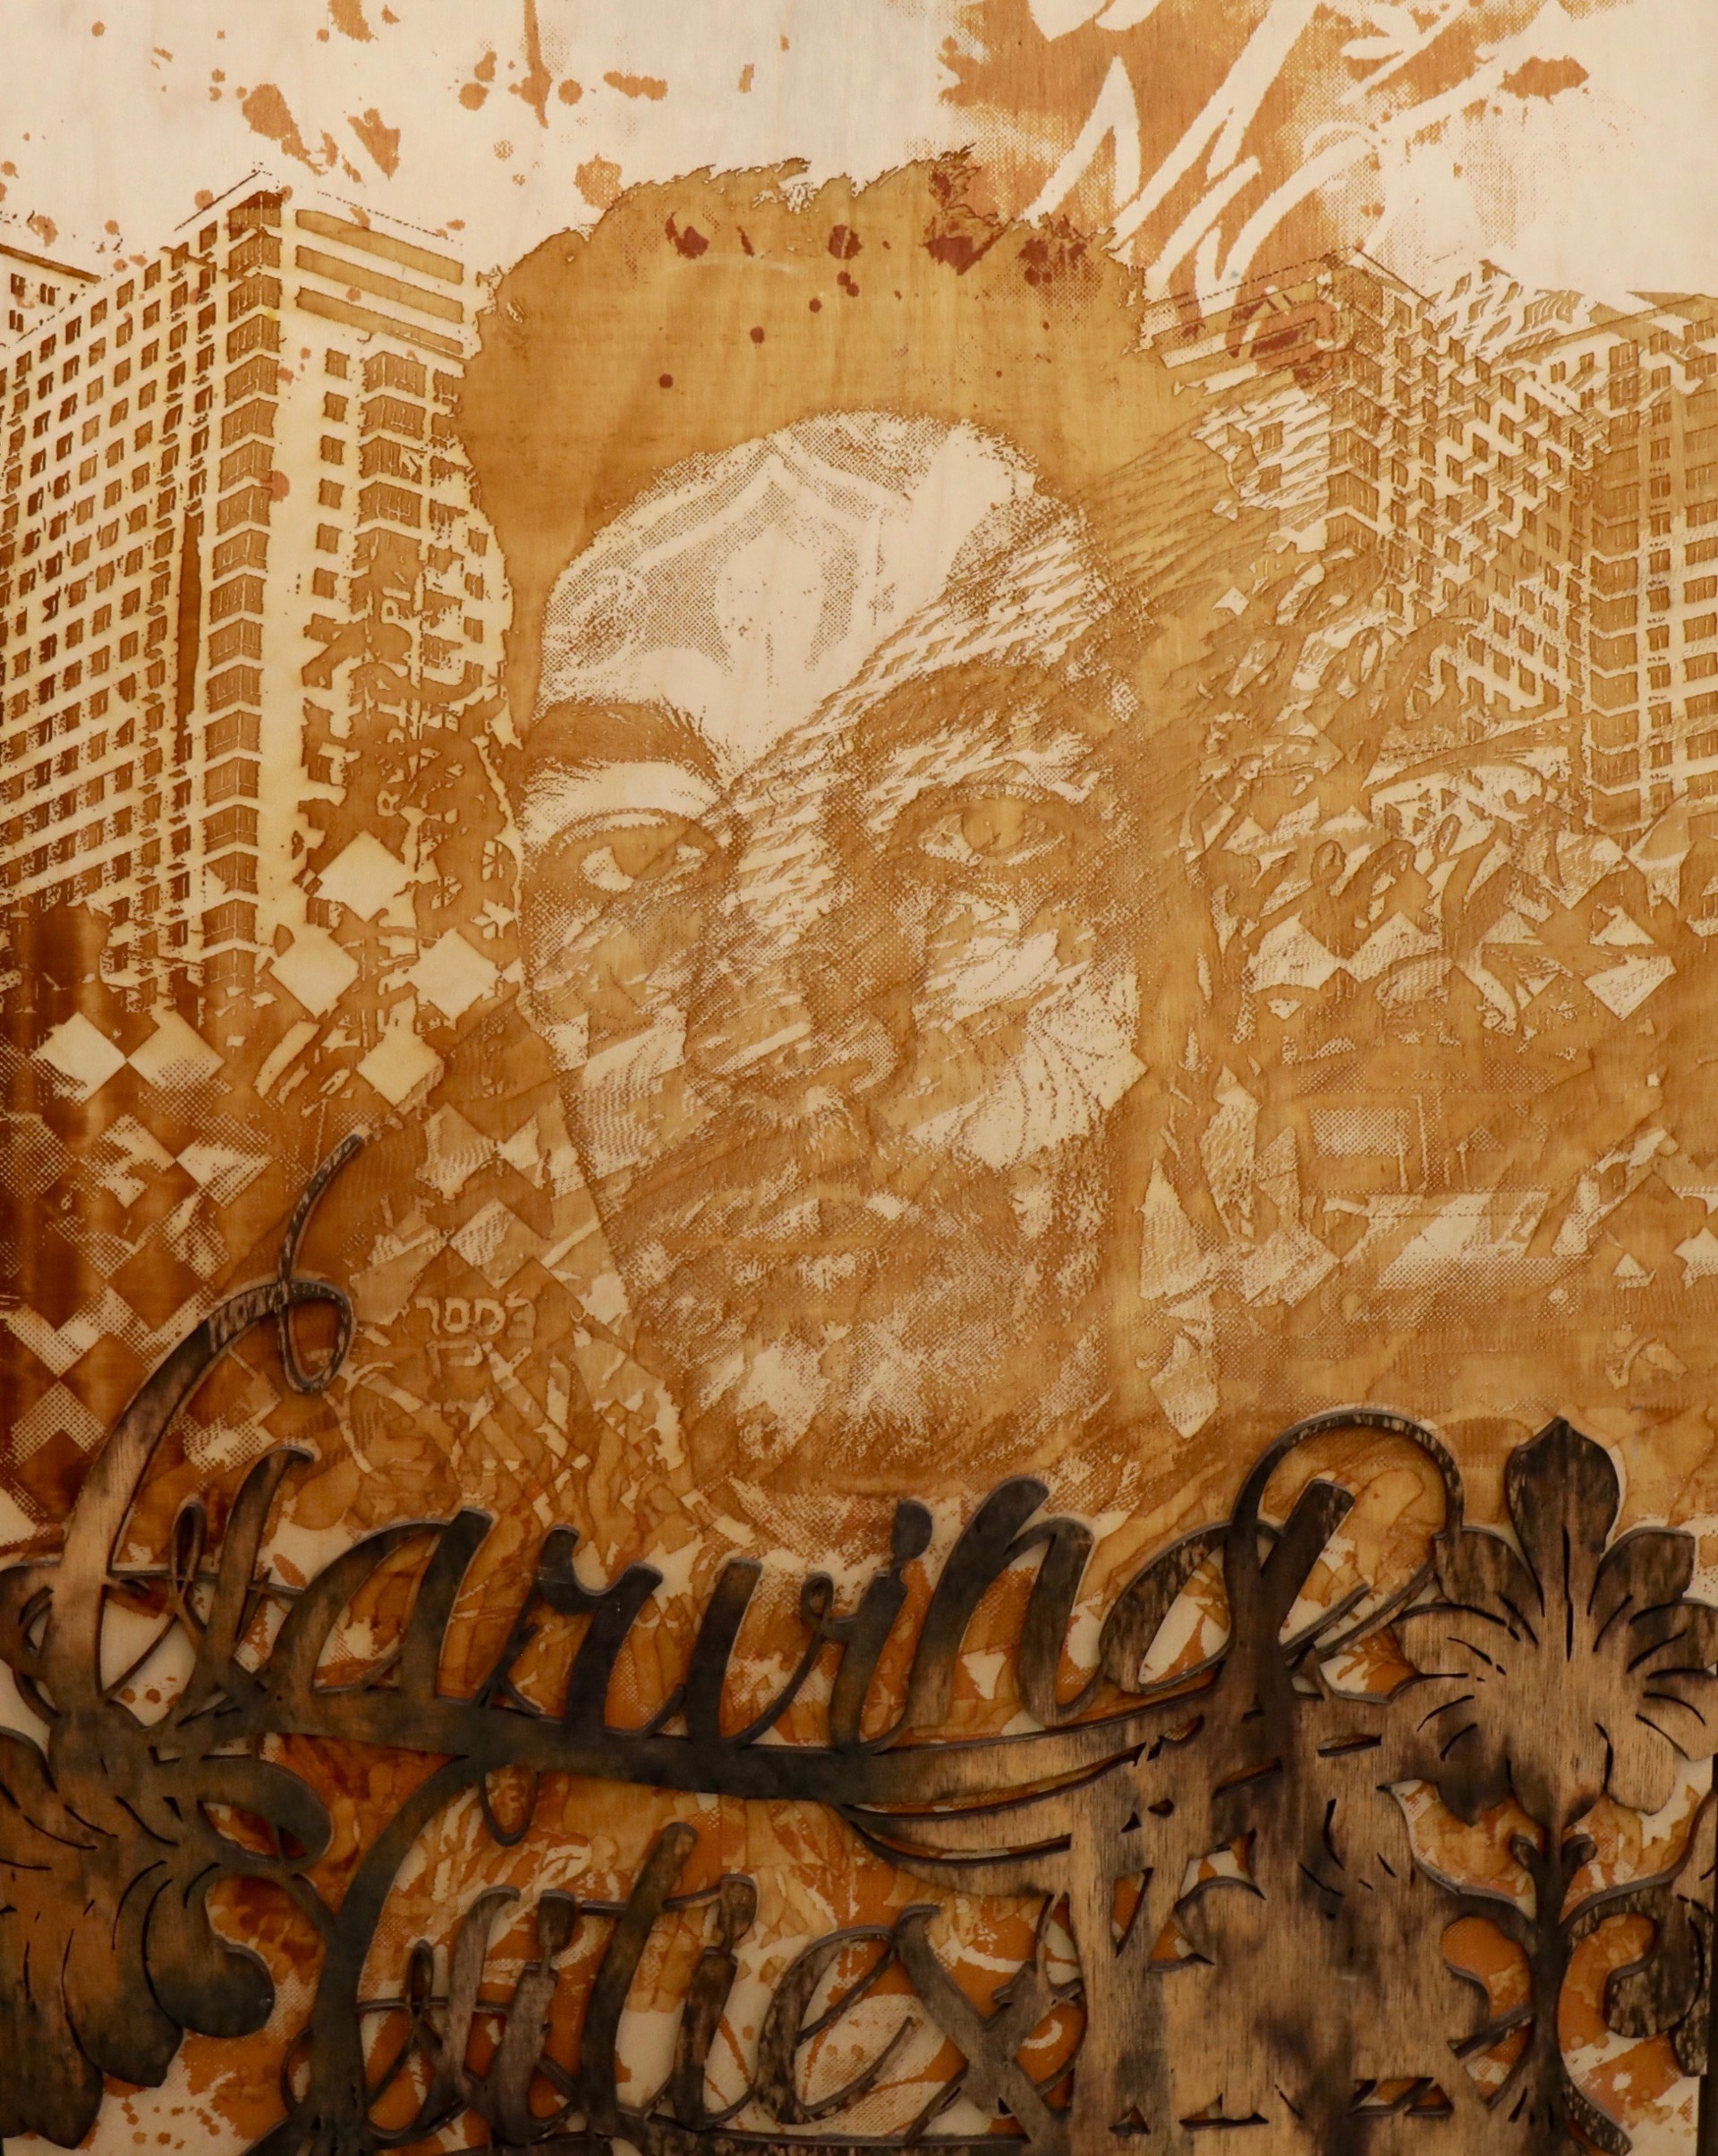 Carving Cities by Vhils (Alexandre Farto)